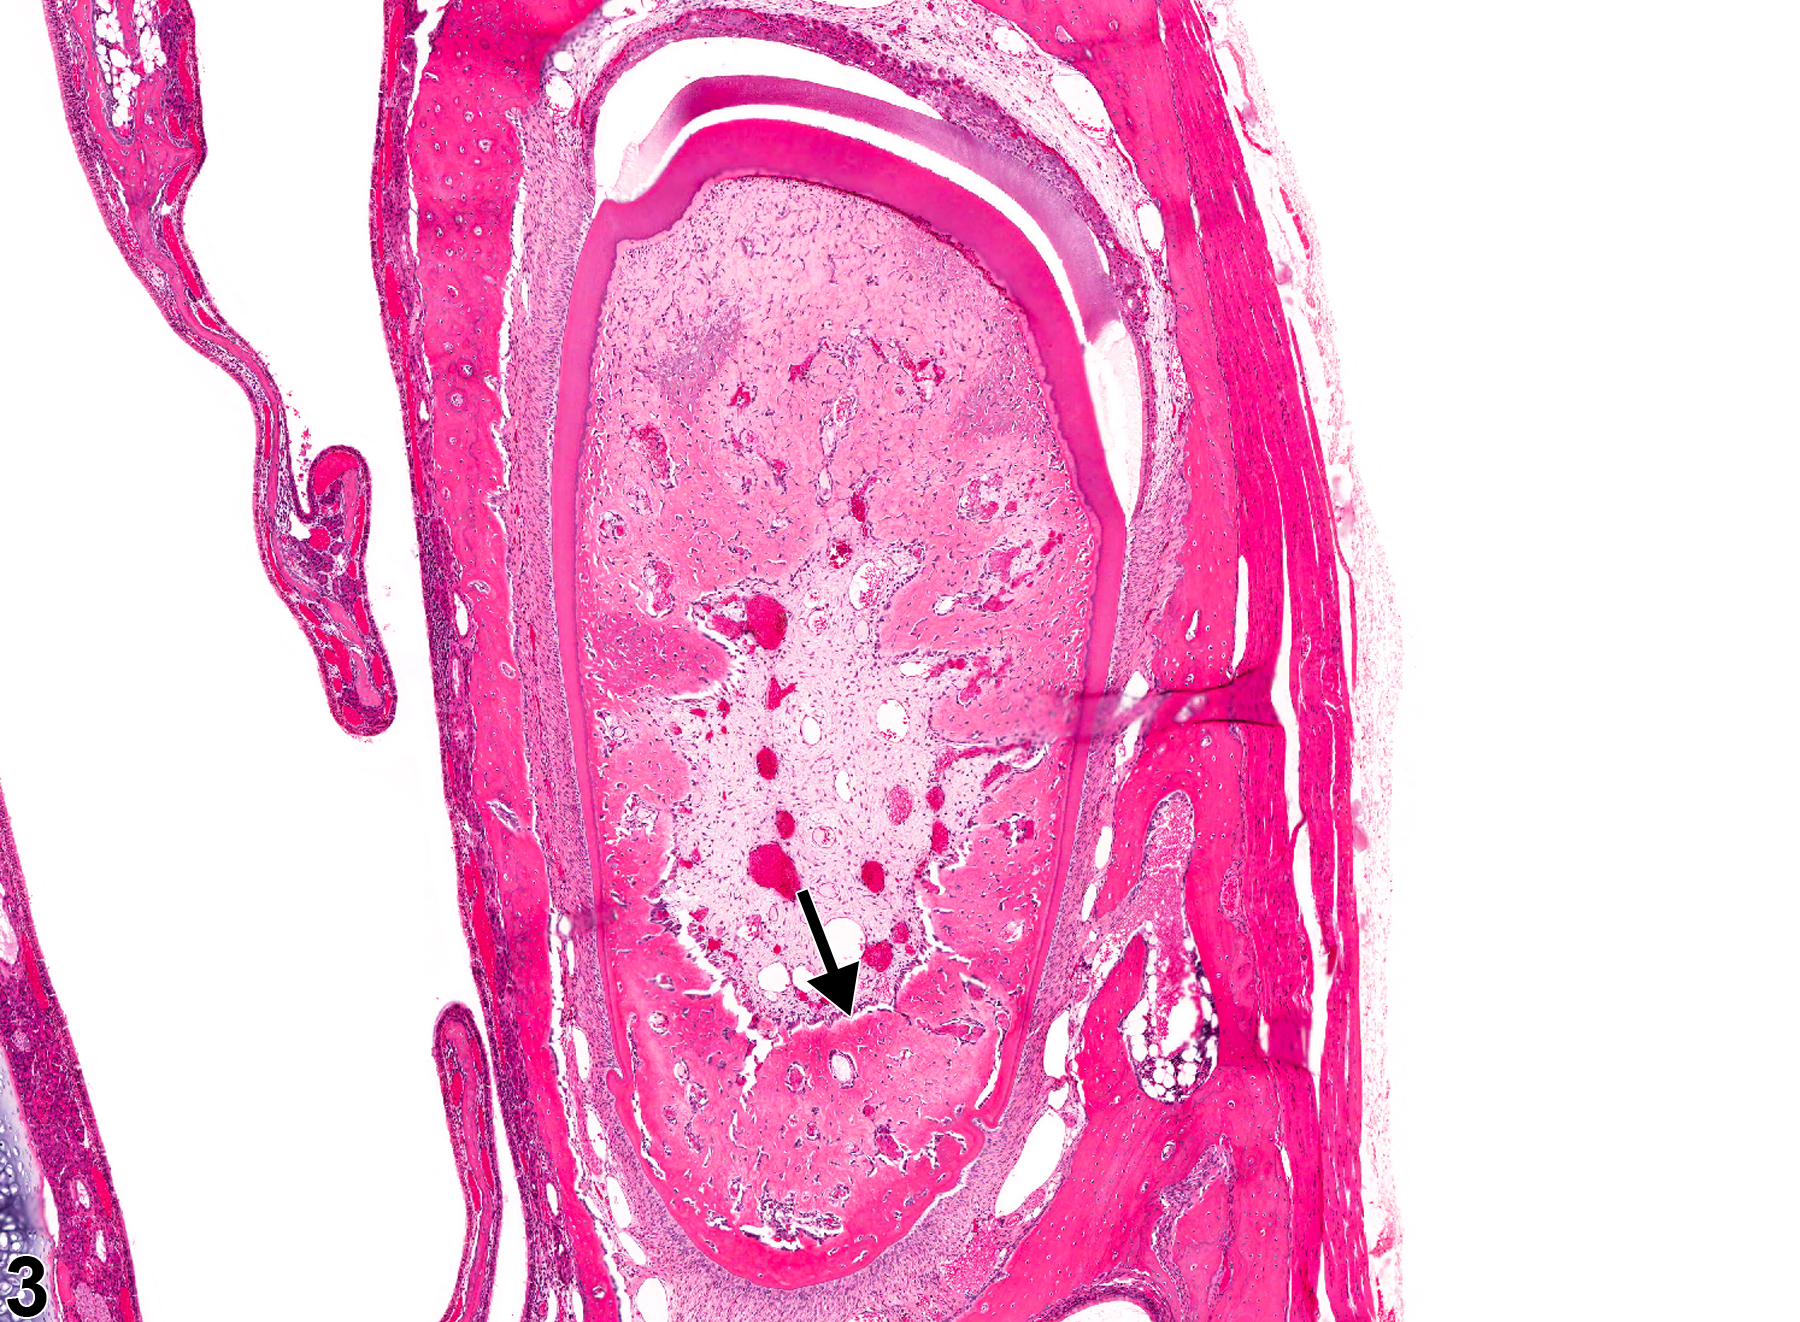 Image of osteodentin in the tooth pulp from a female F344/N rat in a subchronic study